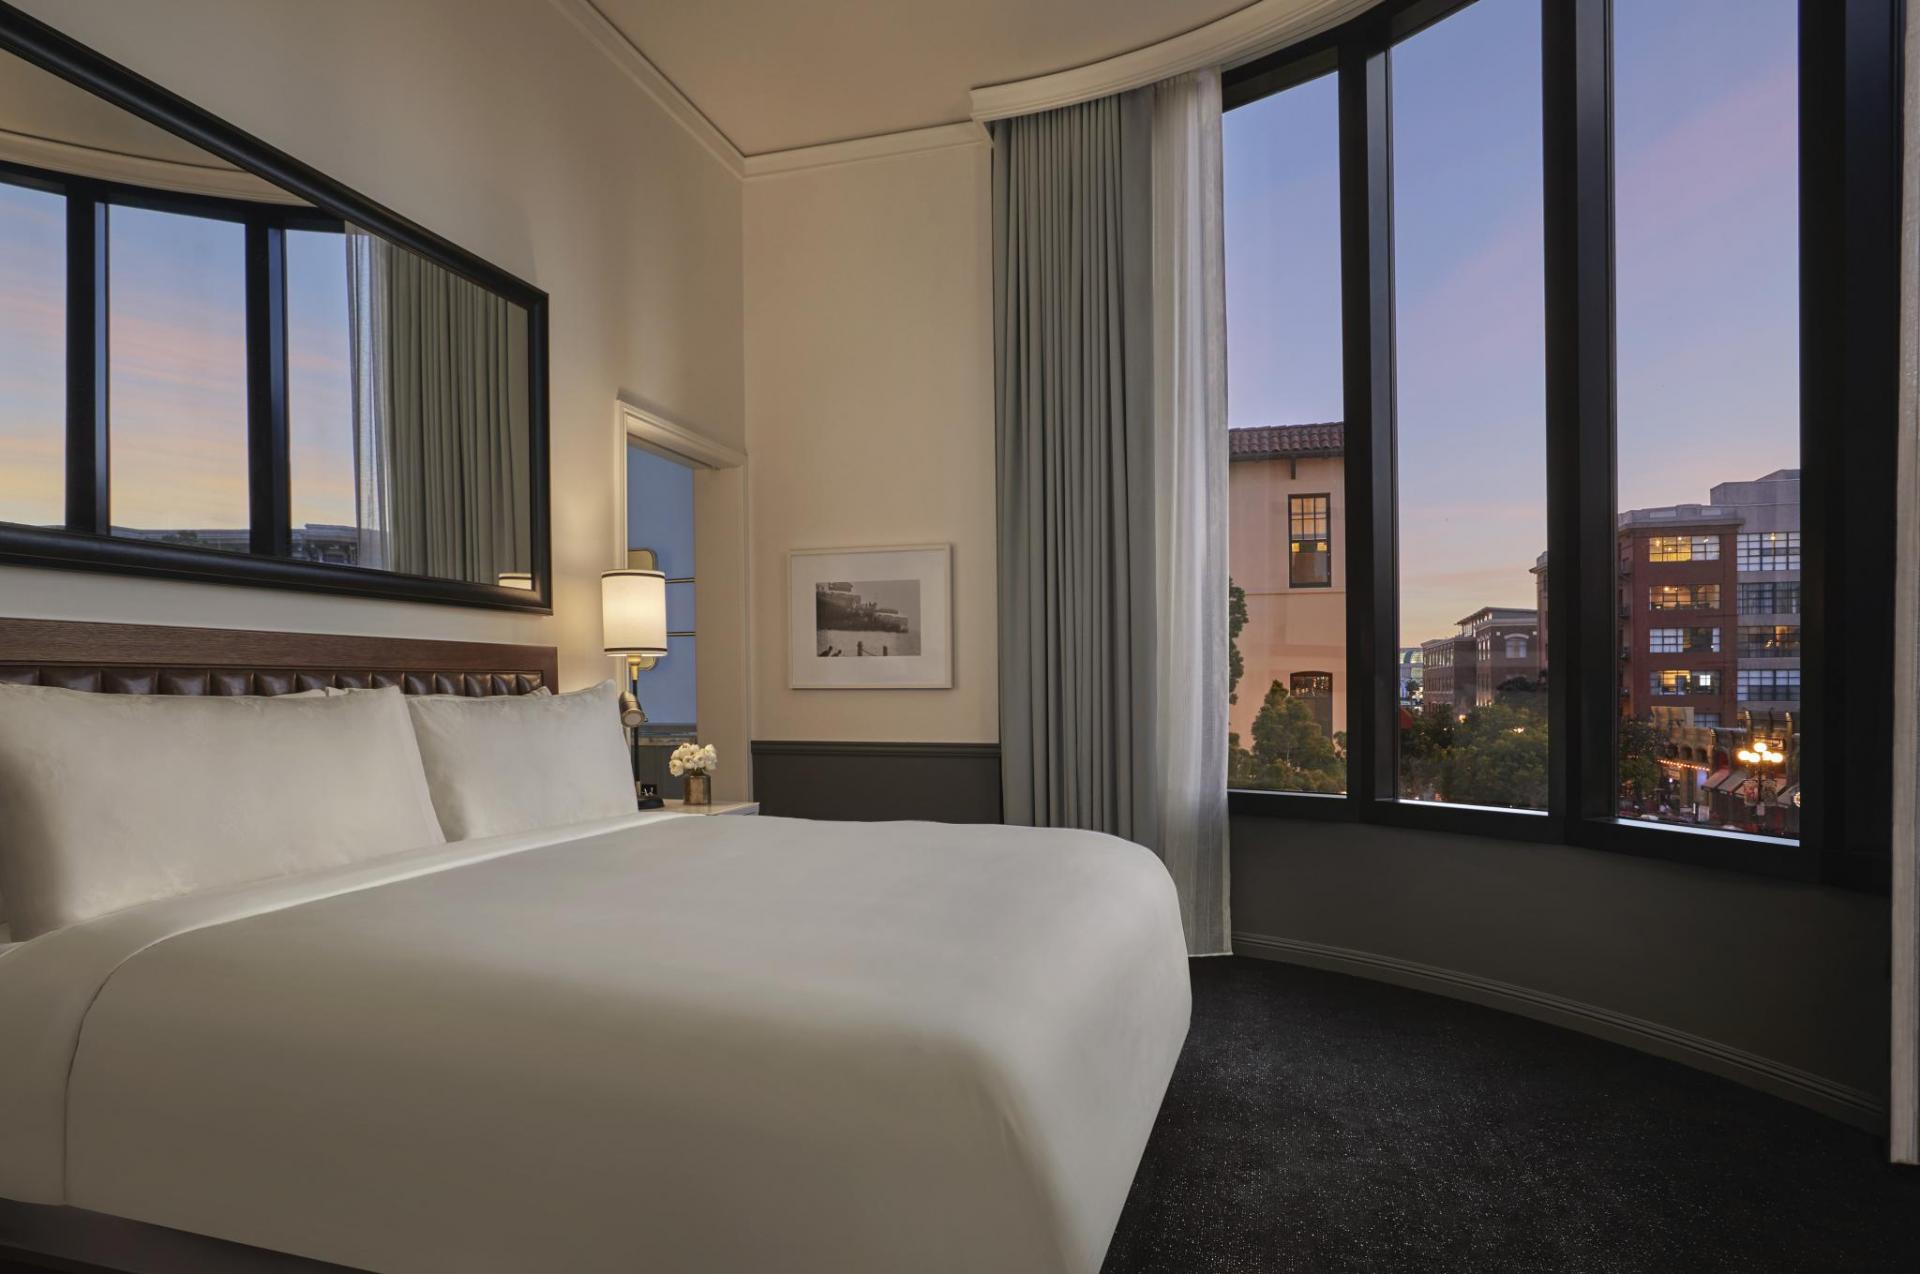 Pendry San Diego Hotel features EFCO Series 5600 Curtain Wall